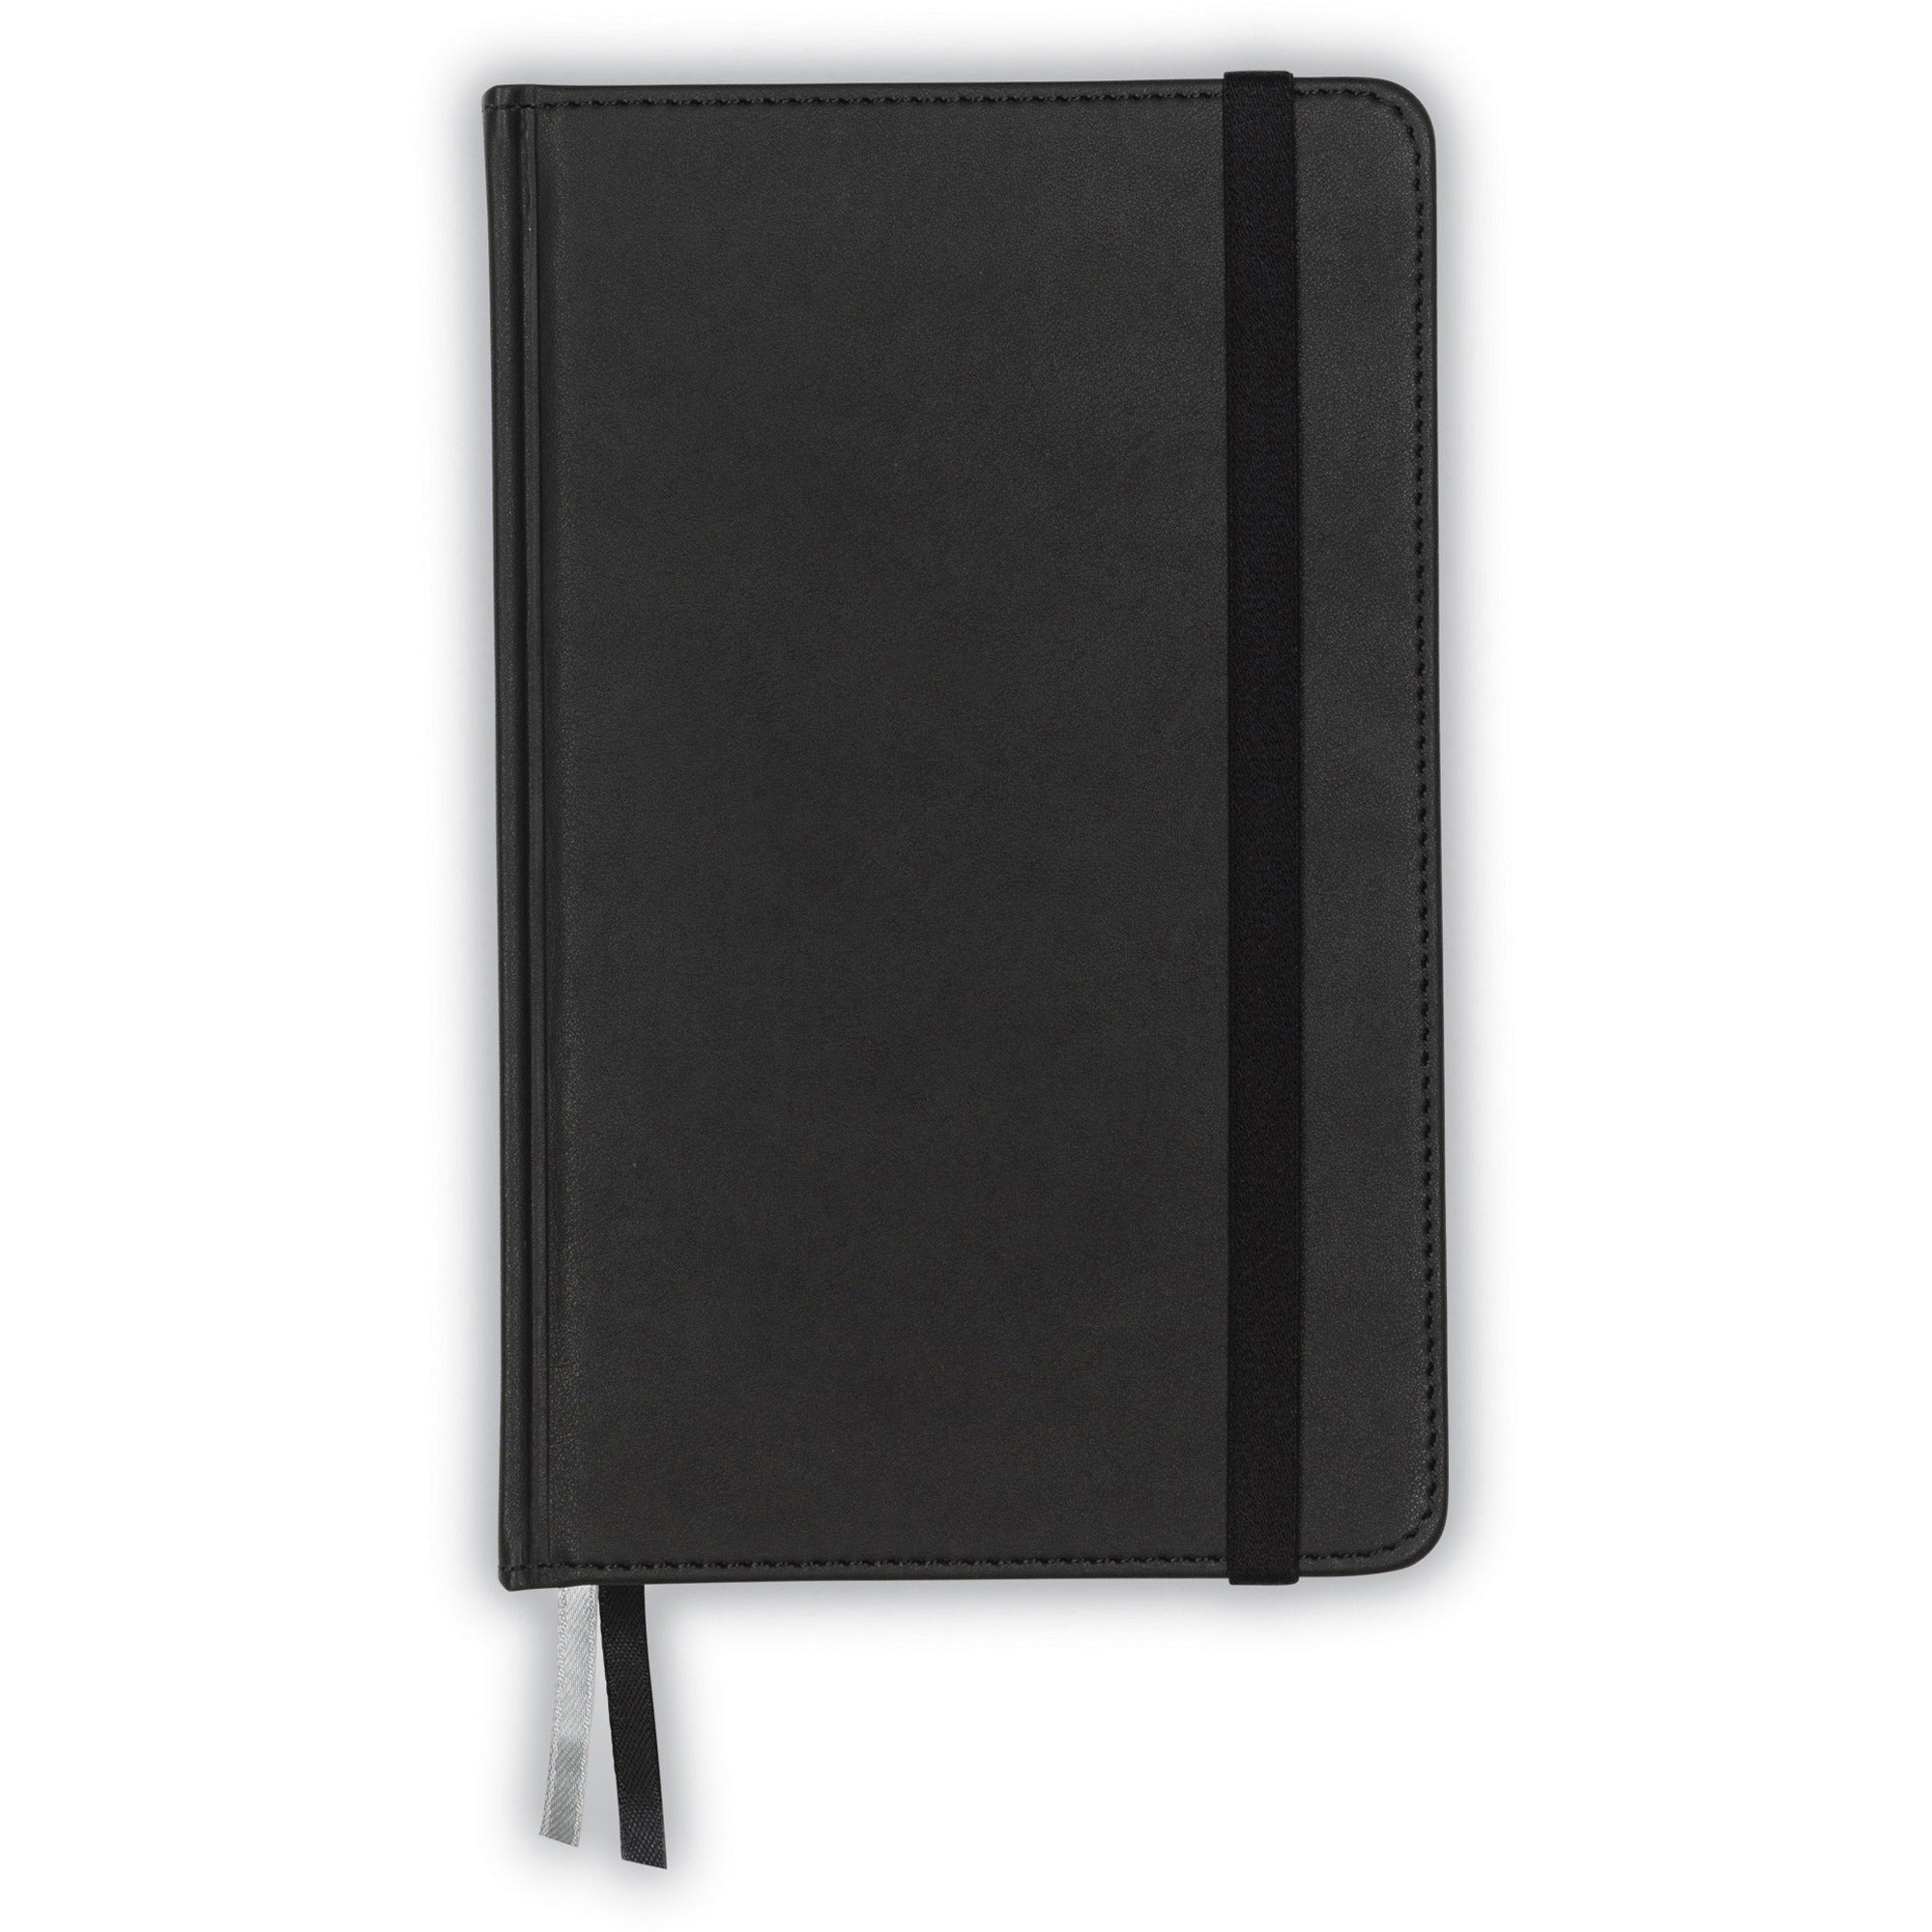 samsill-classic-journal-525-inch-x-825-inch-black-samsill-classic-size-writing-notebook-journal-hardbound-cover-525-inch-x-825-inch-120-ruled-sheets-240-pages-black_sam22300 - 2